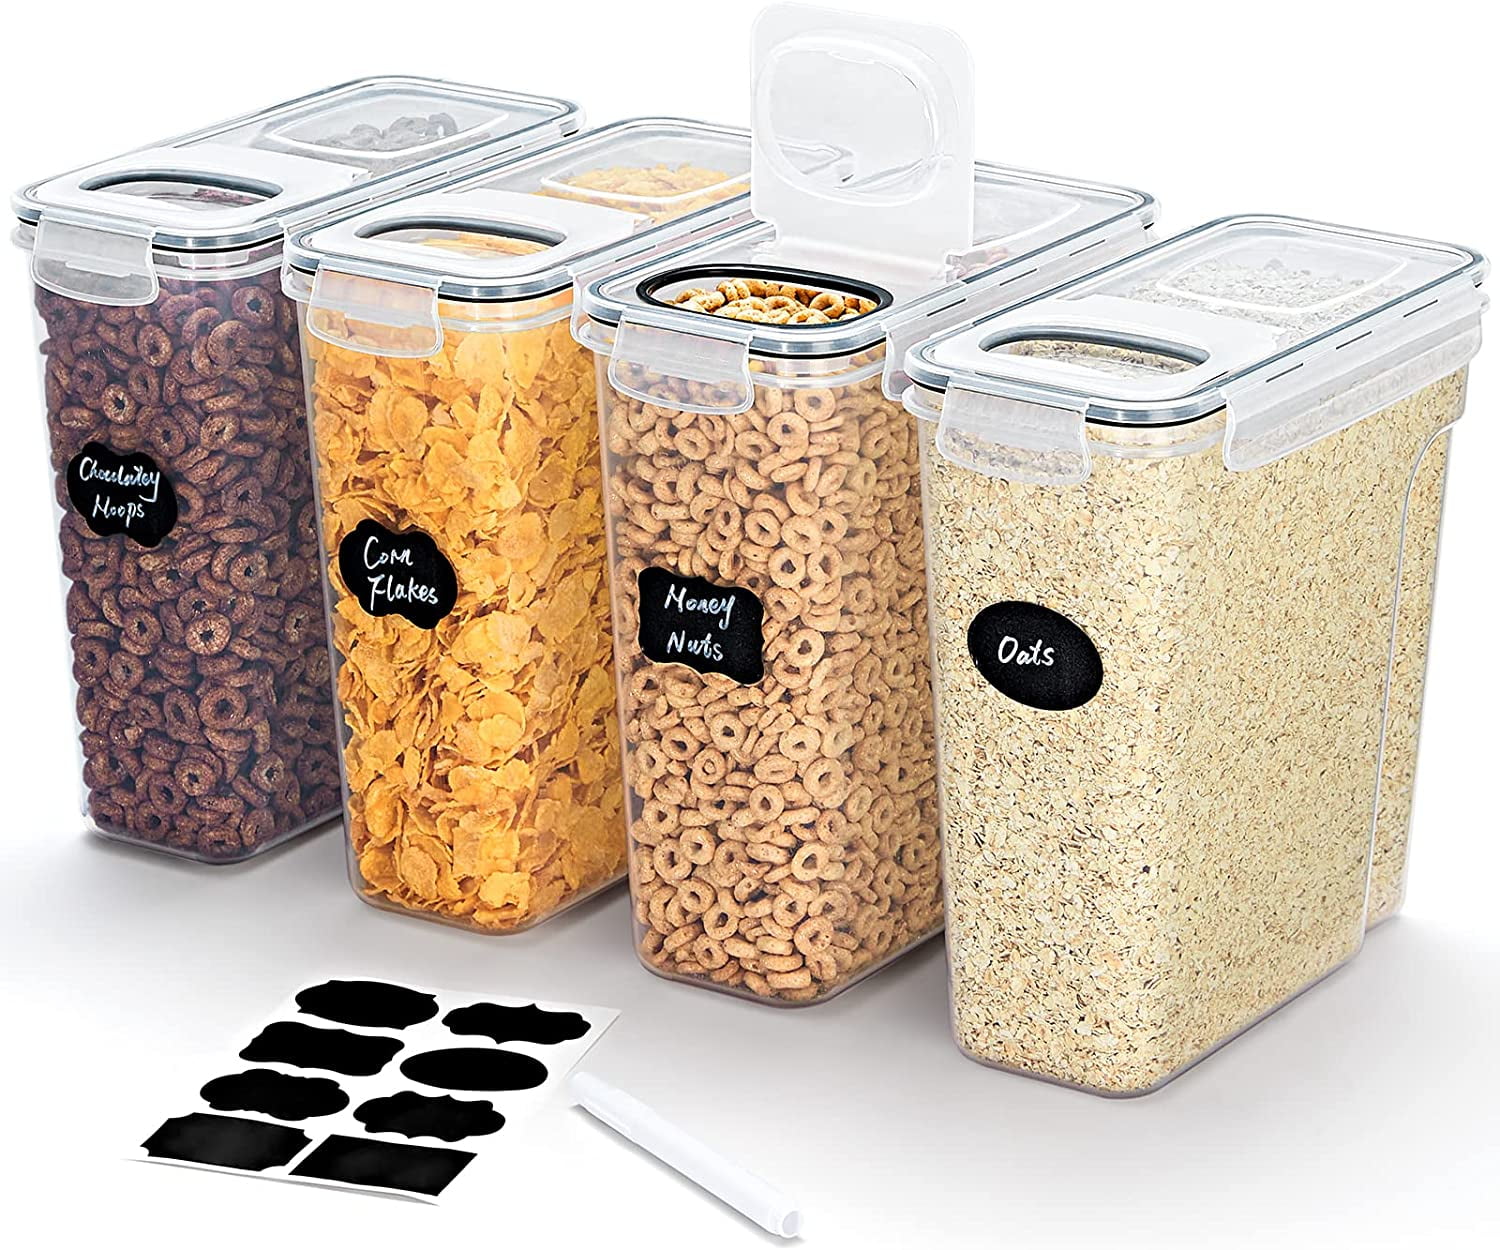 Lifewit 4L(135oz) Cereal Containers Storage with Flip-Top Lids, 4pcs  Airtight Food Storage Canister Sets with Label Stickers for Kitchen Pantry